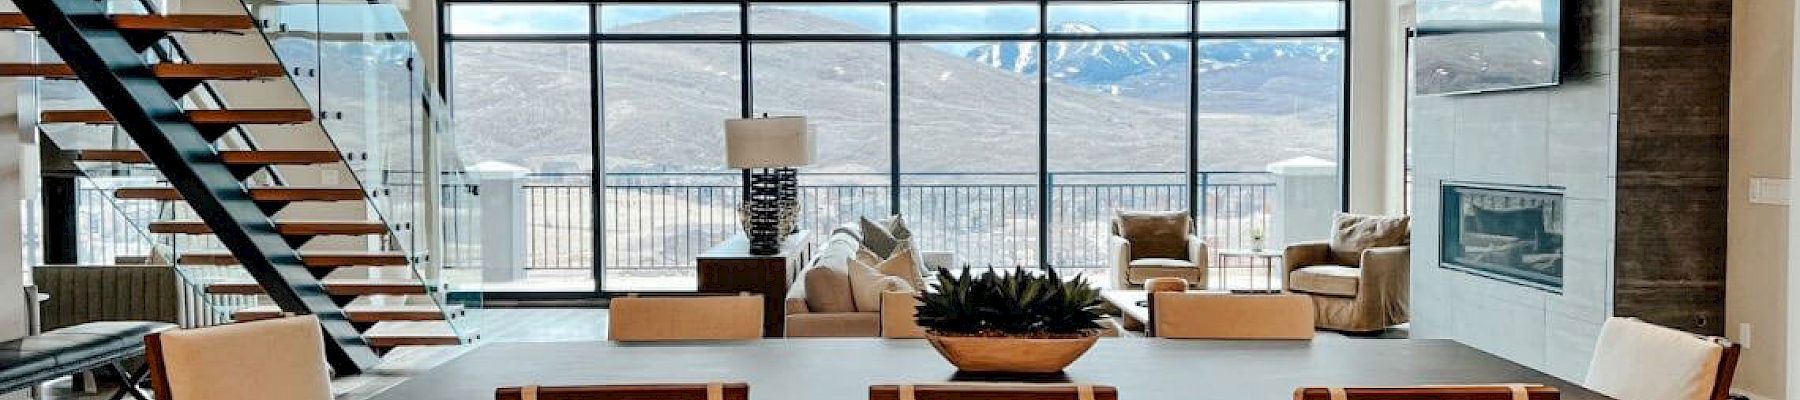 A modern living room with large windows, mountain views, a staircase, dining table, chairs, sofas, and a TV on the wall, ending the sentence.